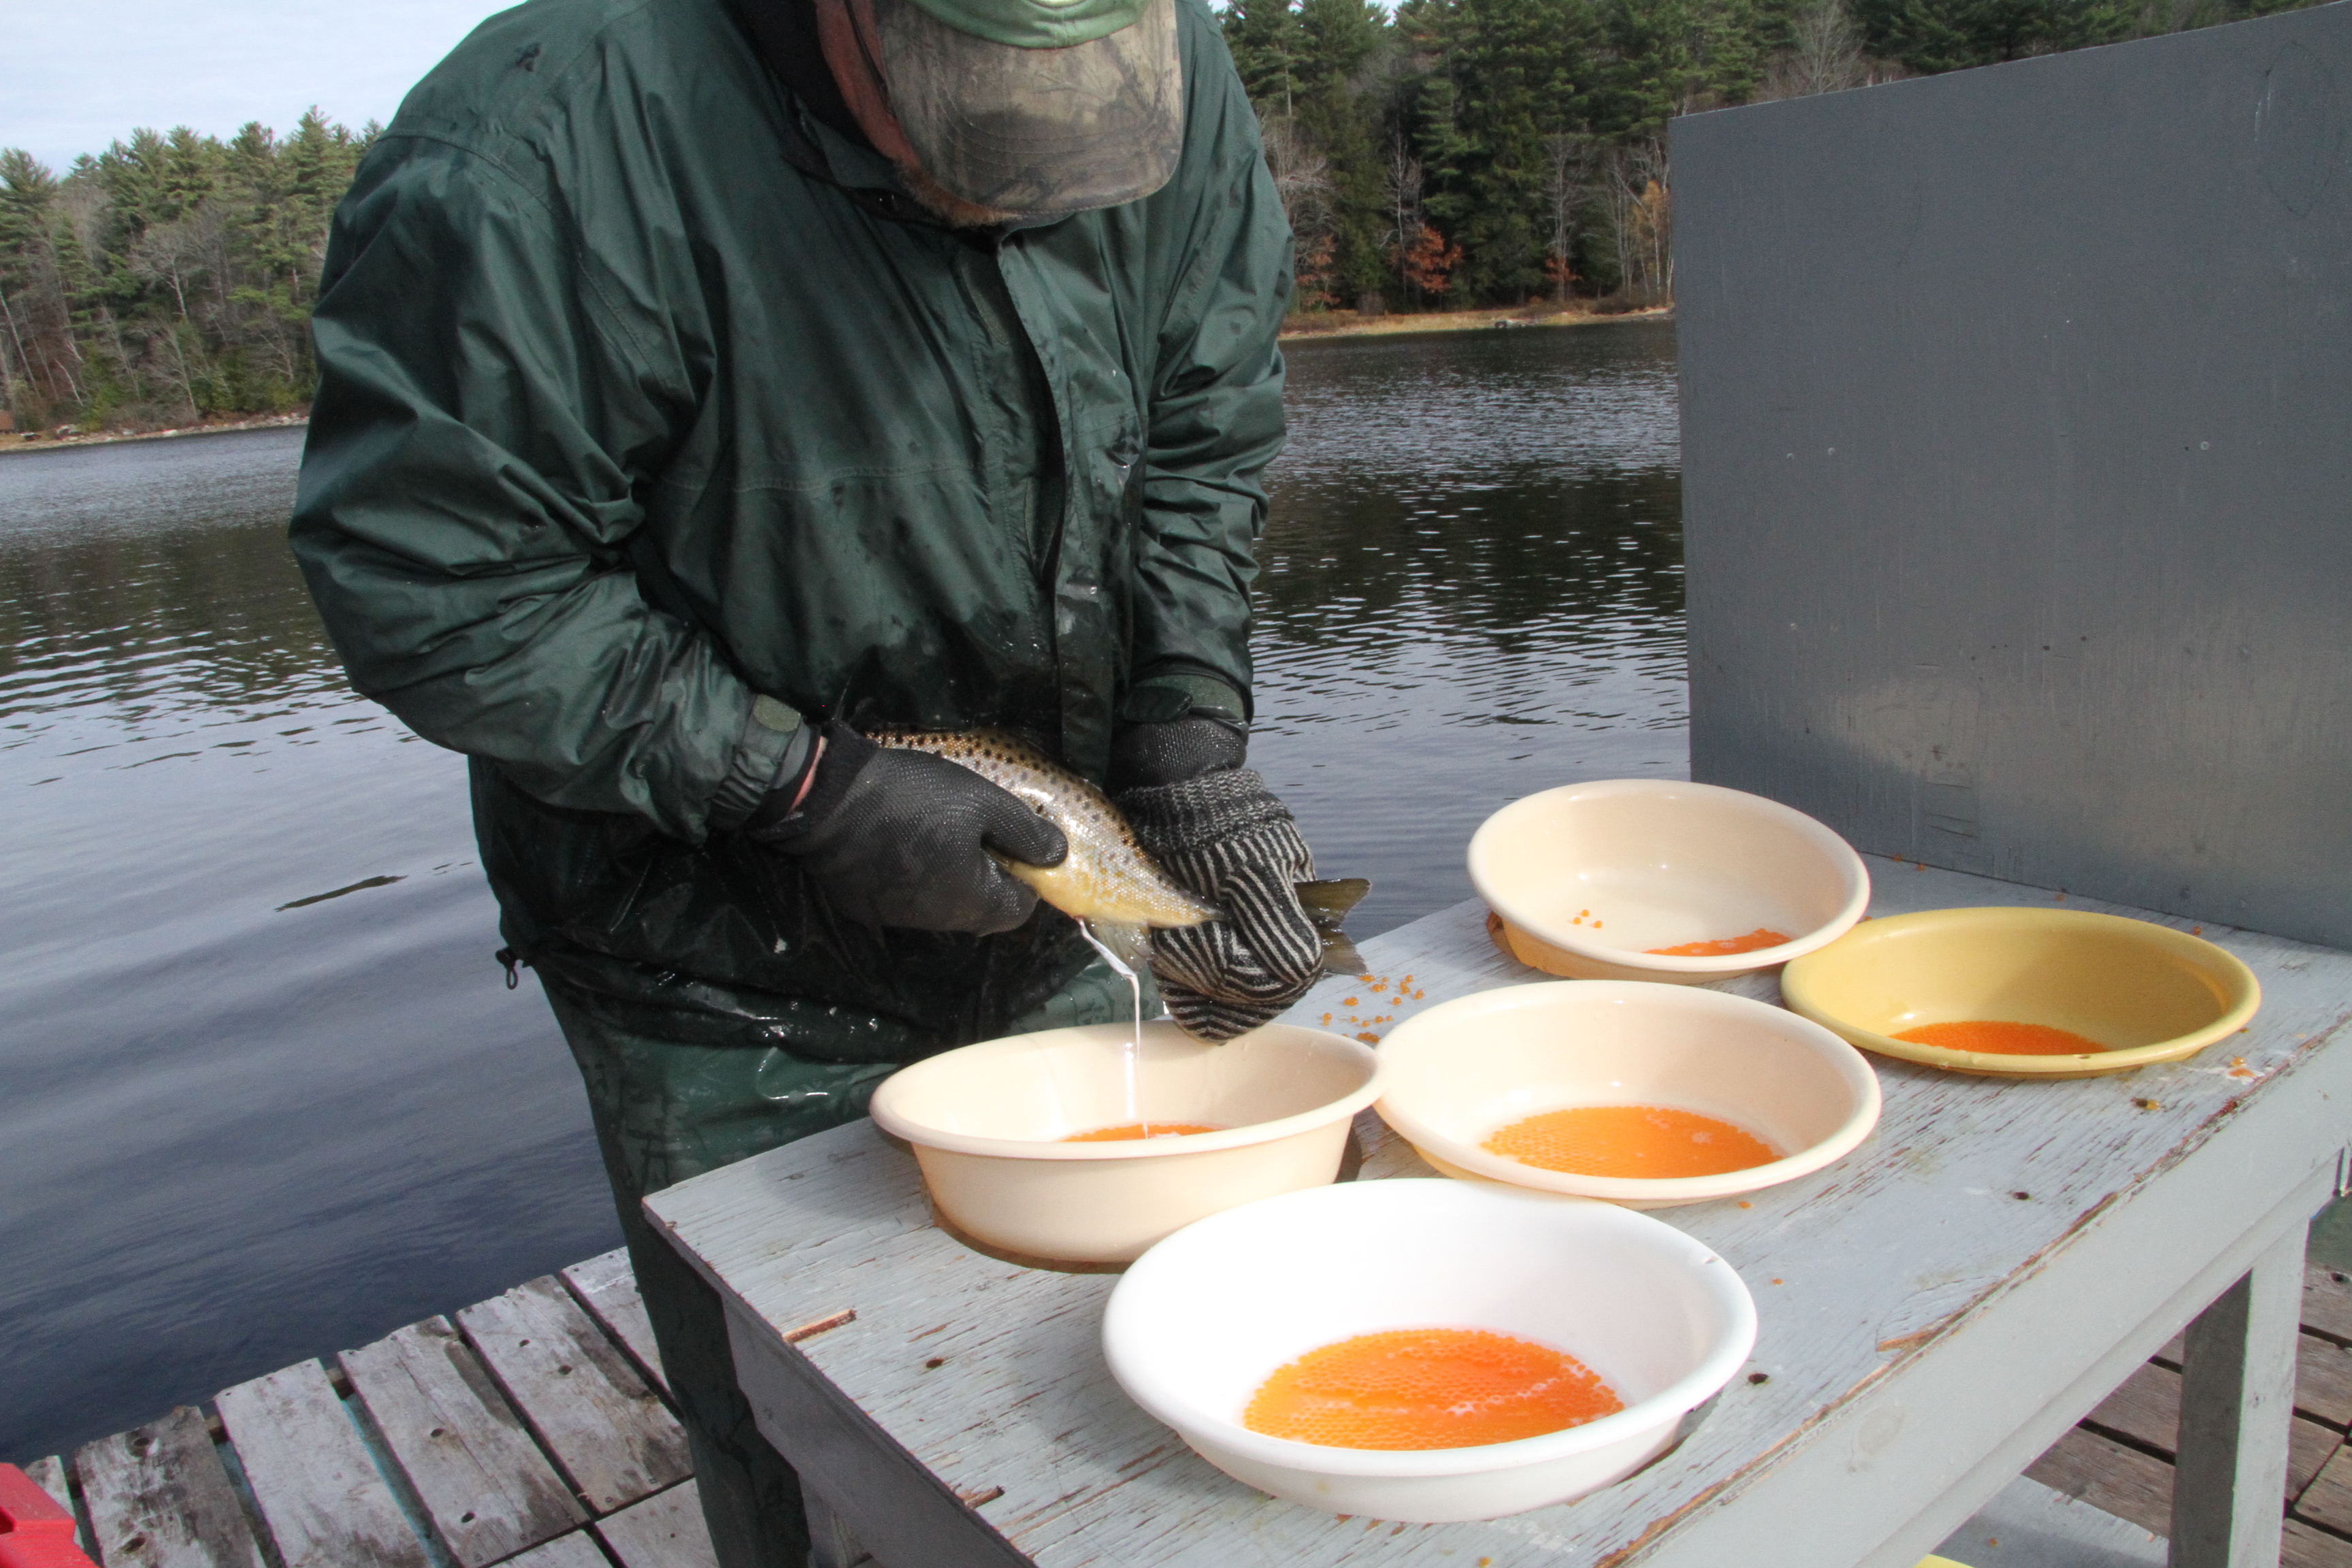 A male salmon's milt is released into a bowl fertilizing salmon eggs.